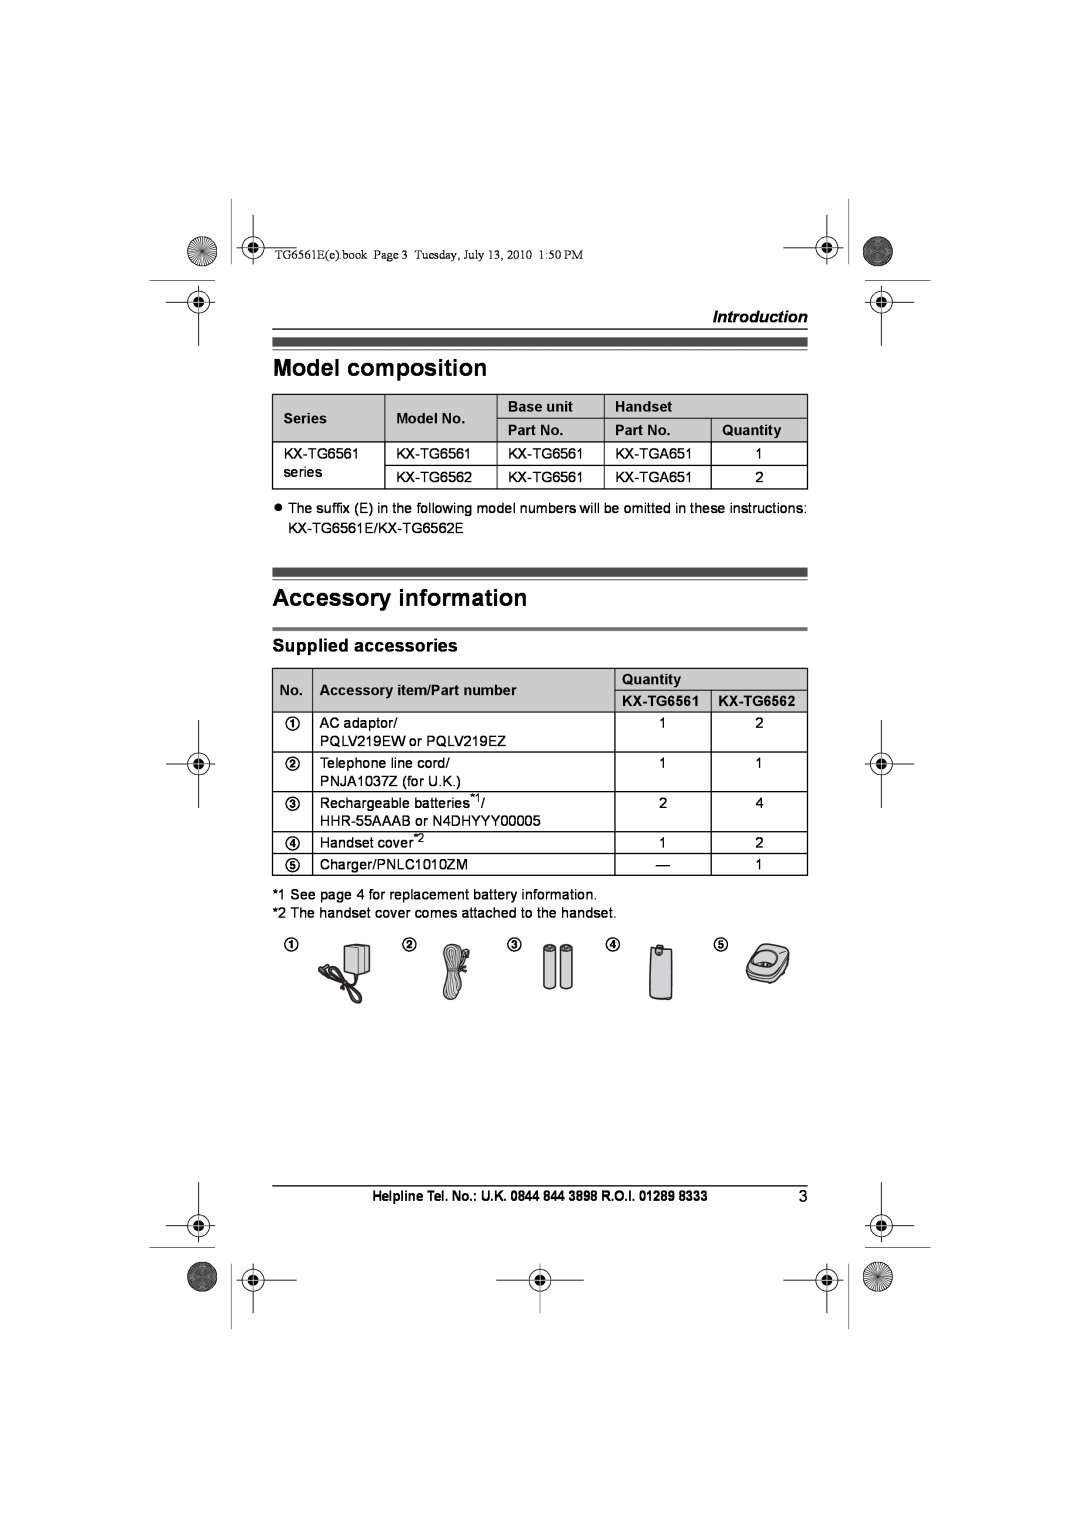 Panasonic KX-TG6561E Model composition, Accessory information, Supplied accessories, Introduction, Series, Model No 